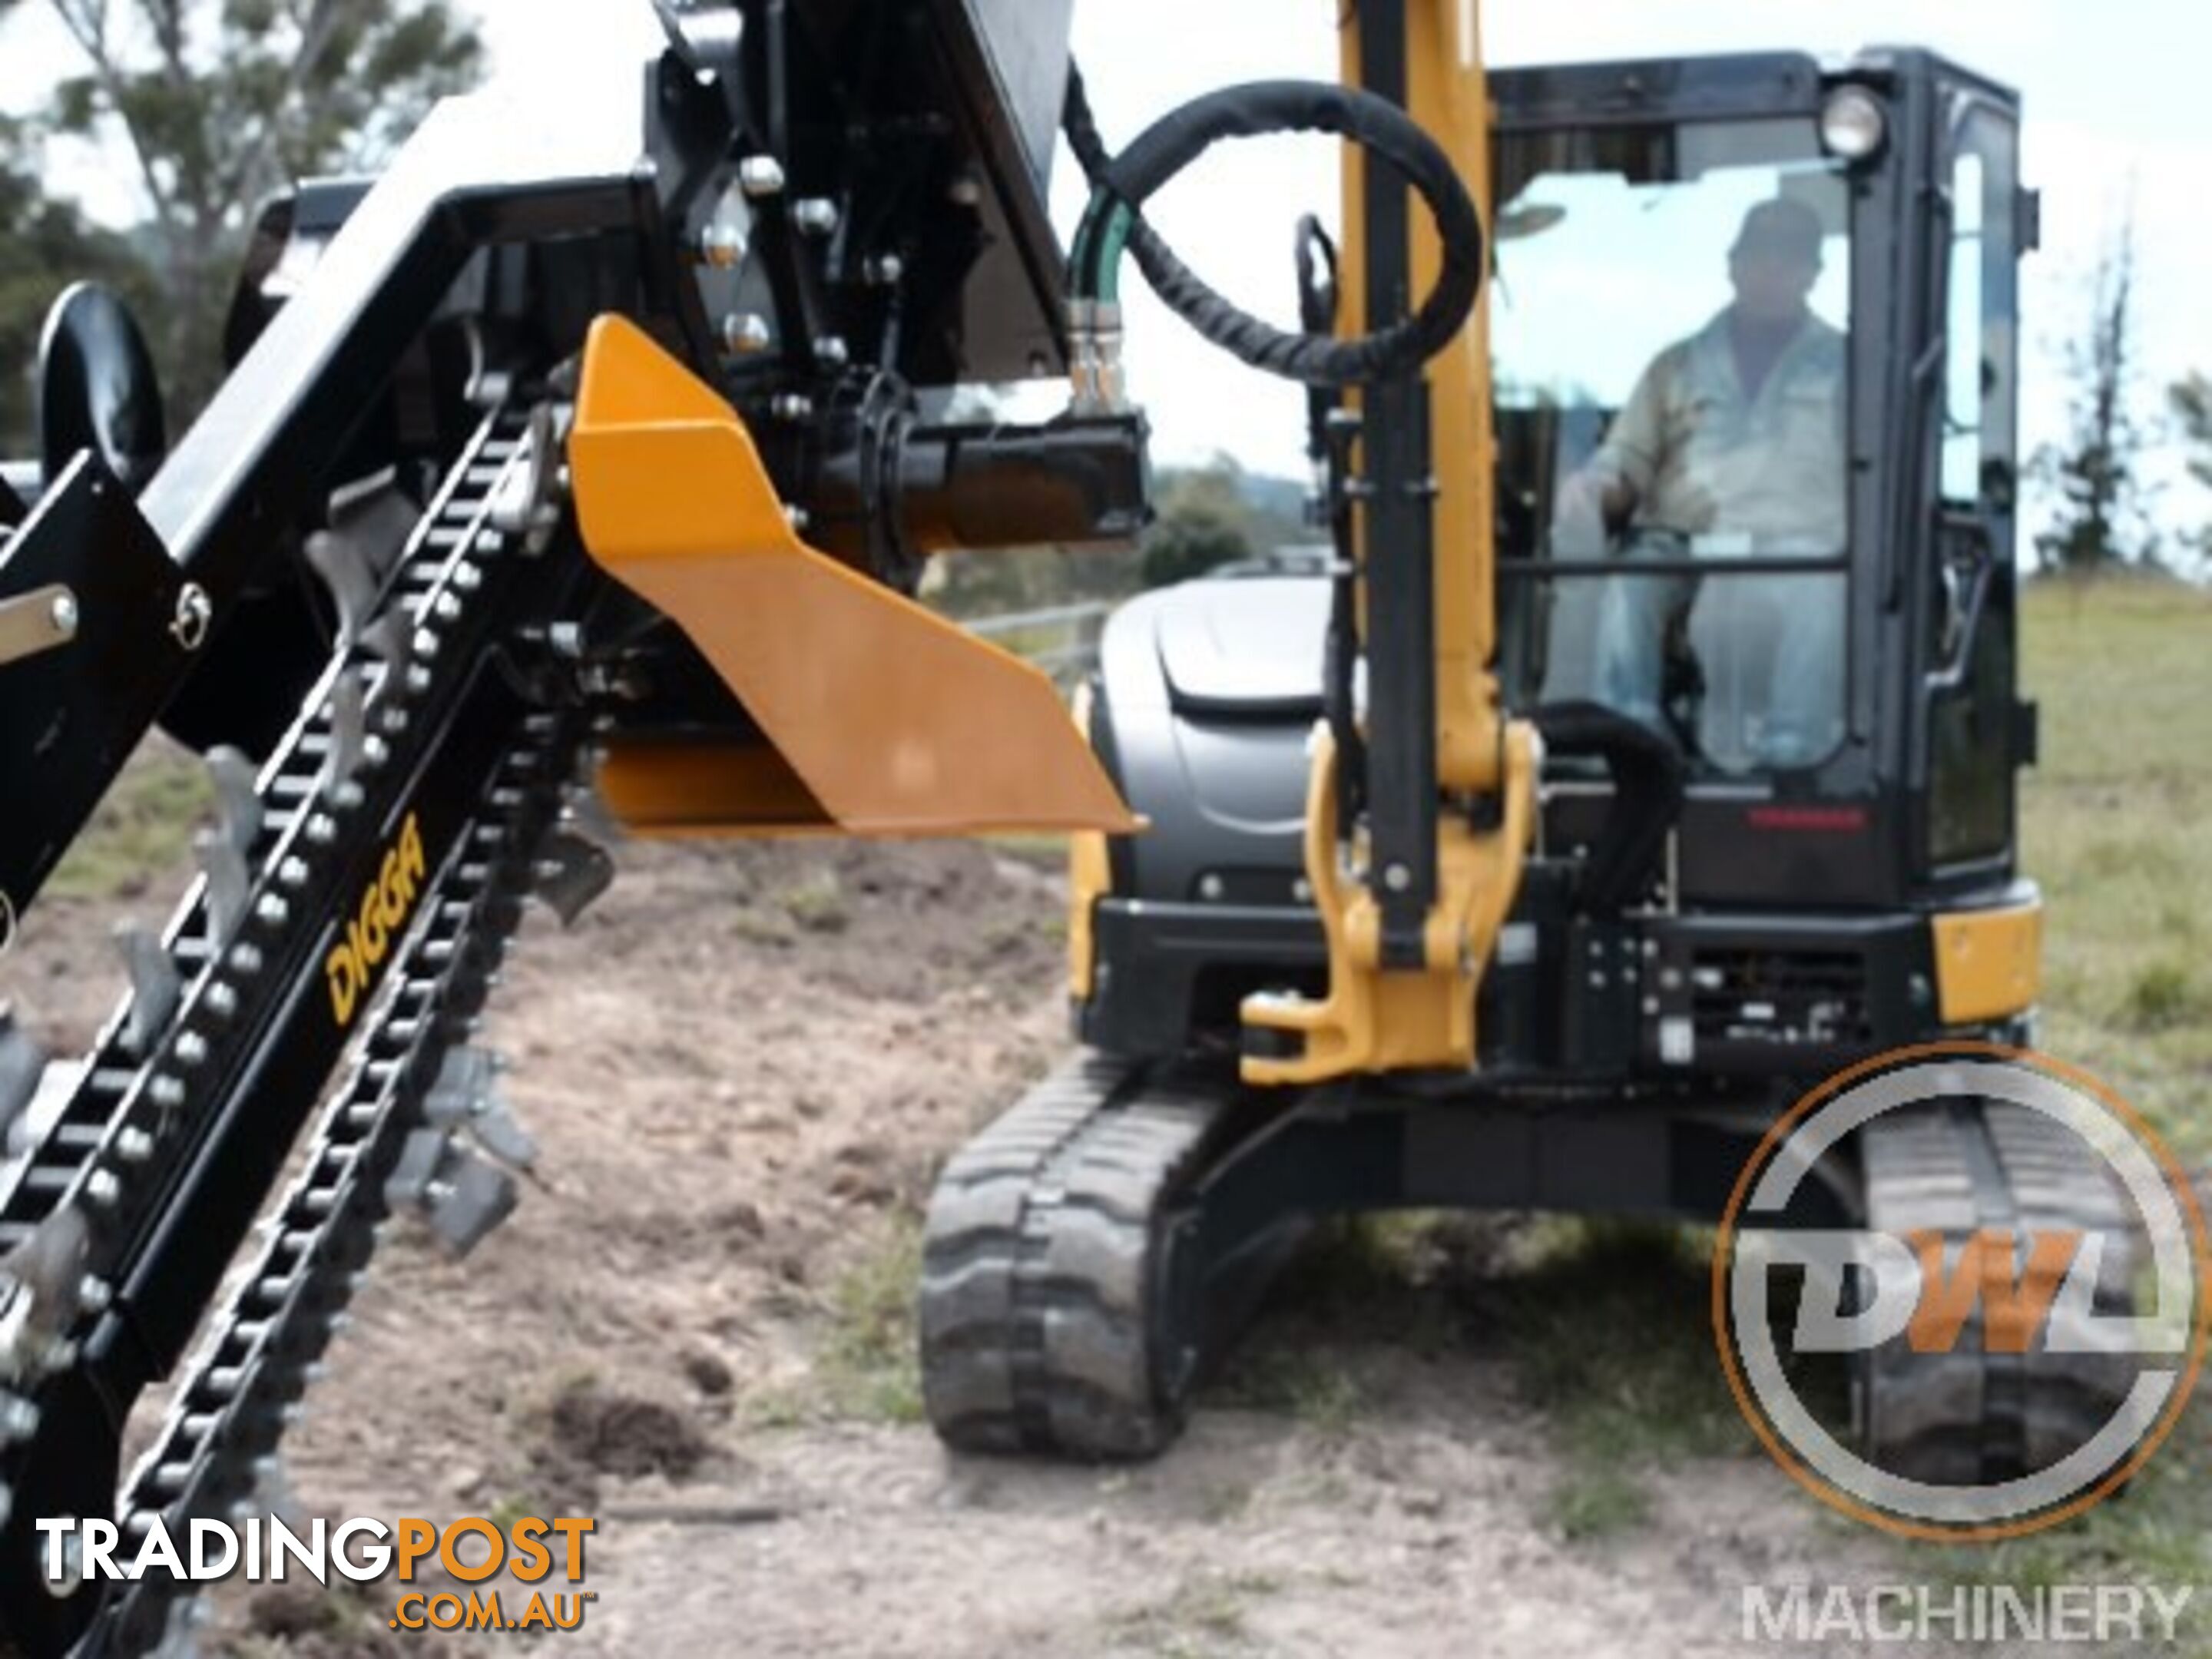 DIGGA TRENCHERS ALL MAKES ALL MODELS SUIT SUIT EXCAVATOR BOBCAT TRACTOR TELEHANDLER Trencher Attachments